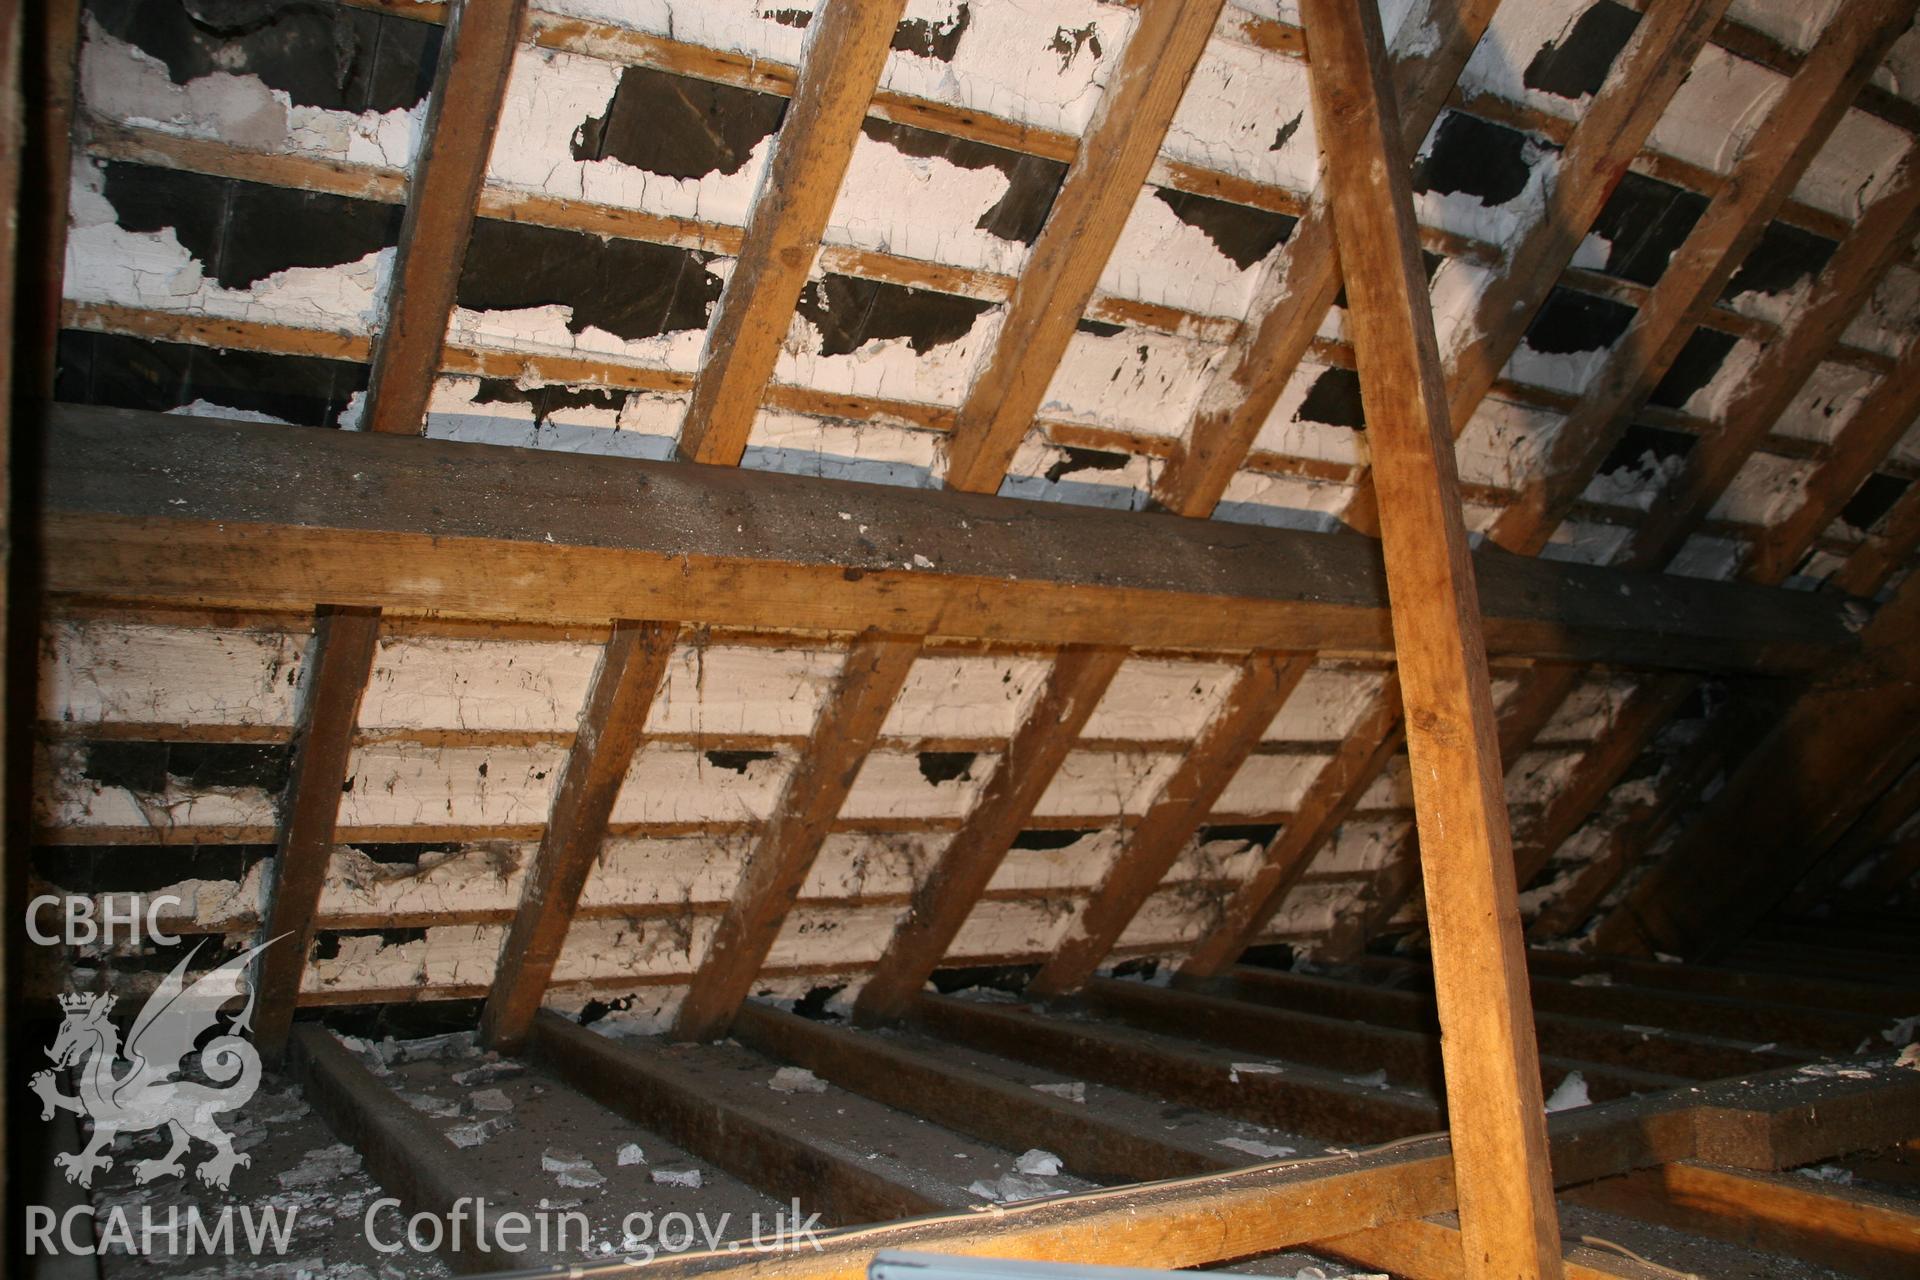 Photograph showing detailed interior view of wooden beams and roof of the former Llawrybettws Welsh Calvinistic Methodist chapel, Glanyrafon, Corwen. Produced by Tim Allen on 27th February 2019 to meet a condition attached to planning application.